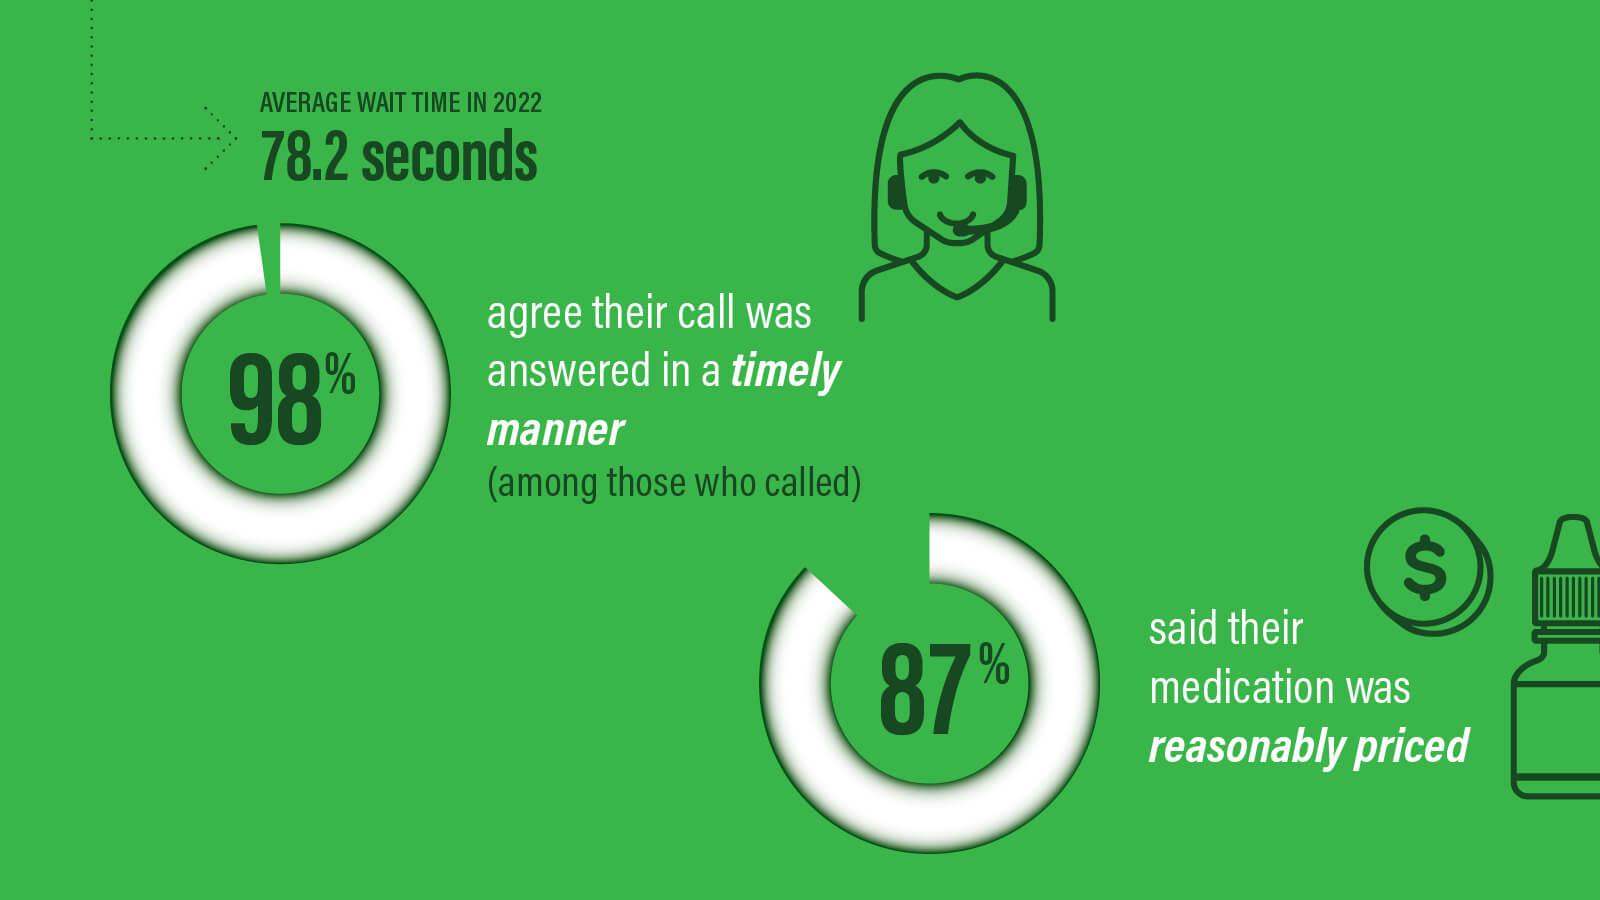 98% agree their call was answered in a timely manner (among those who called)